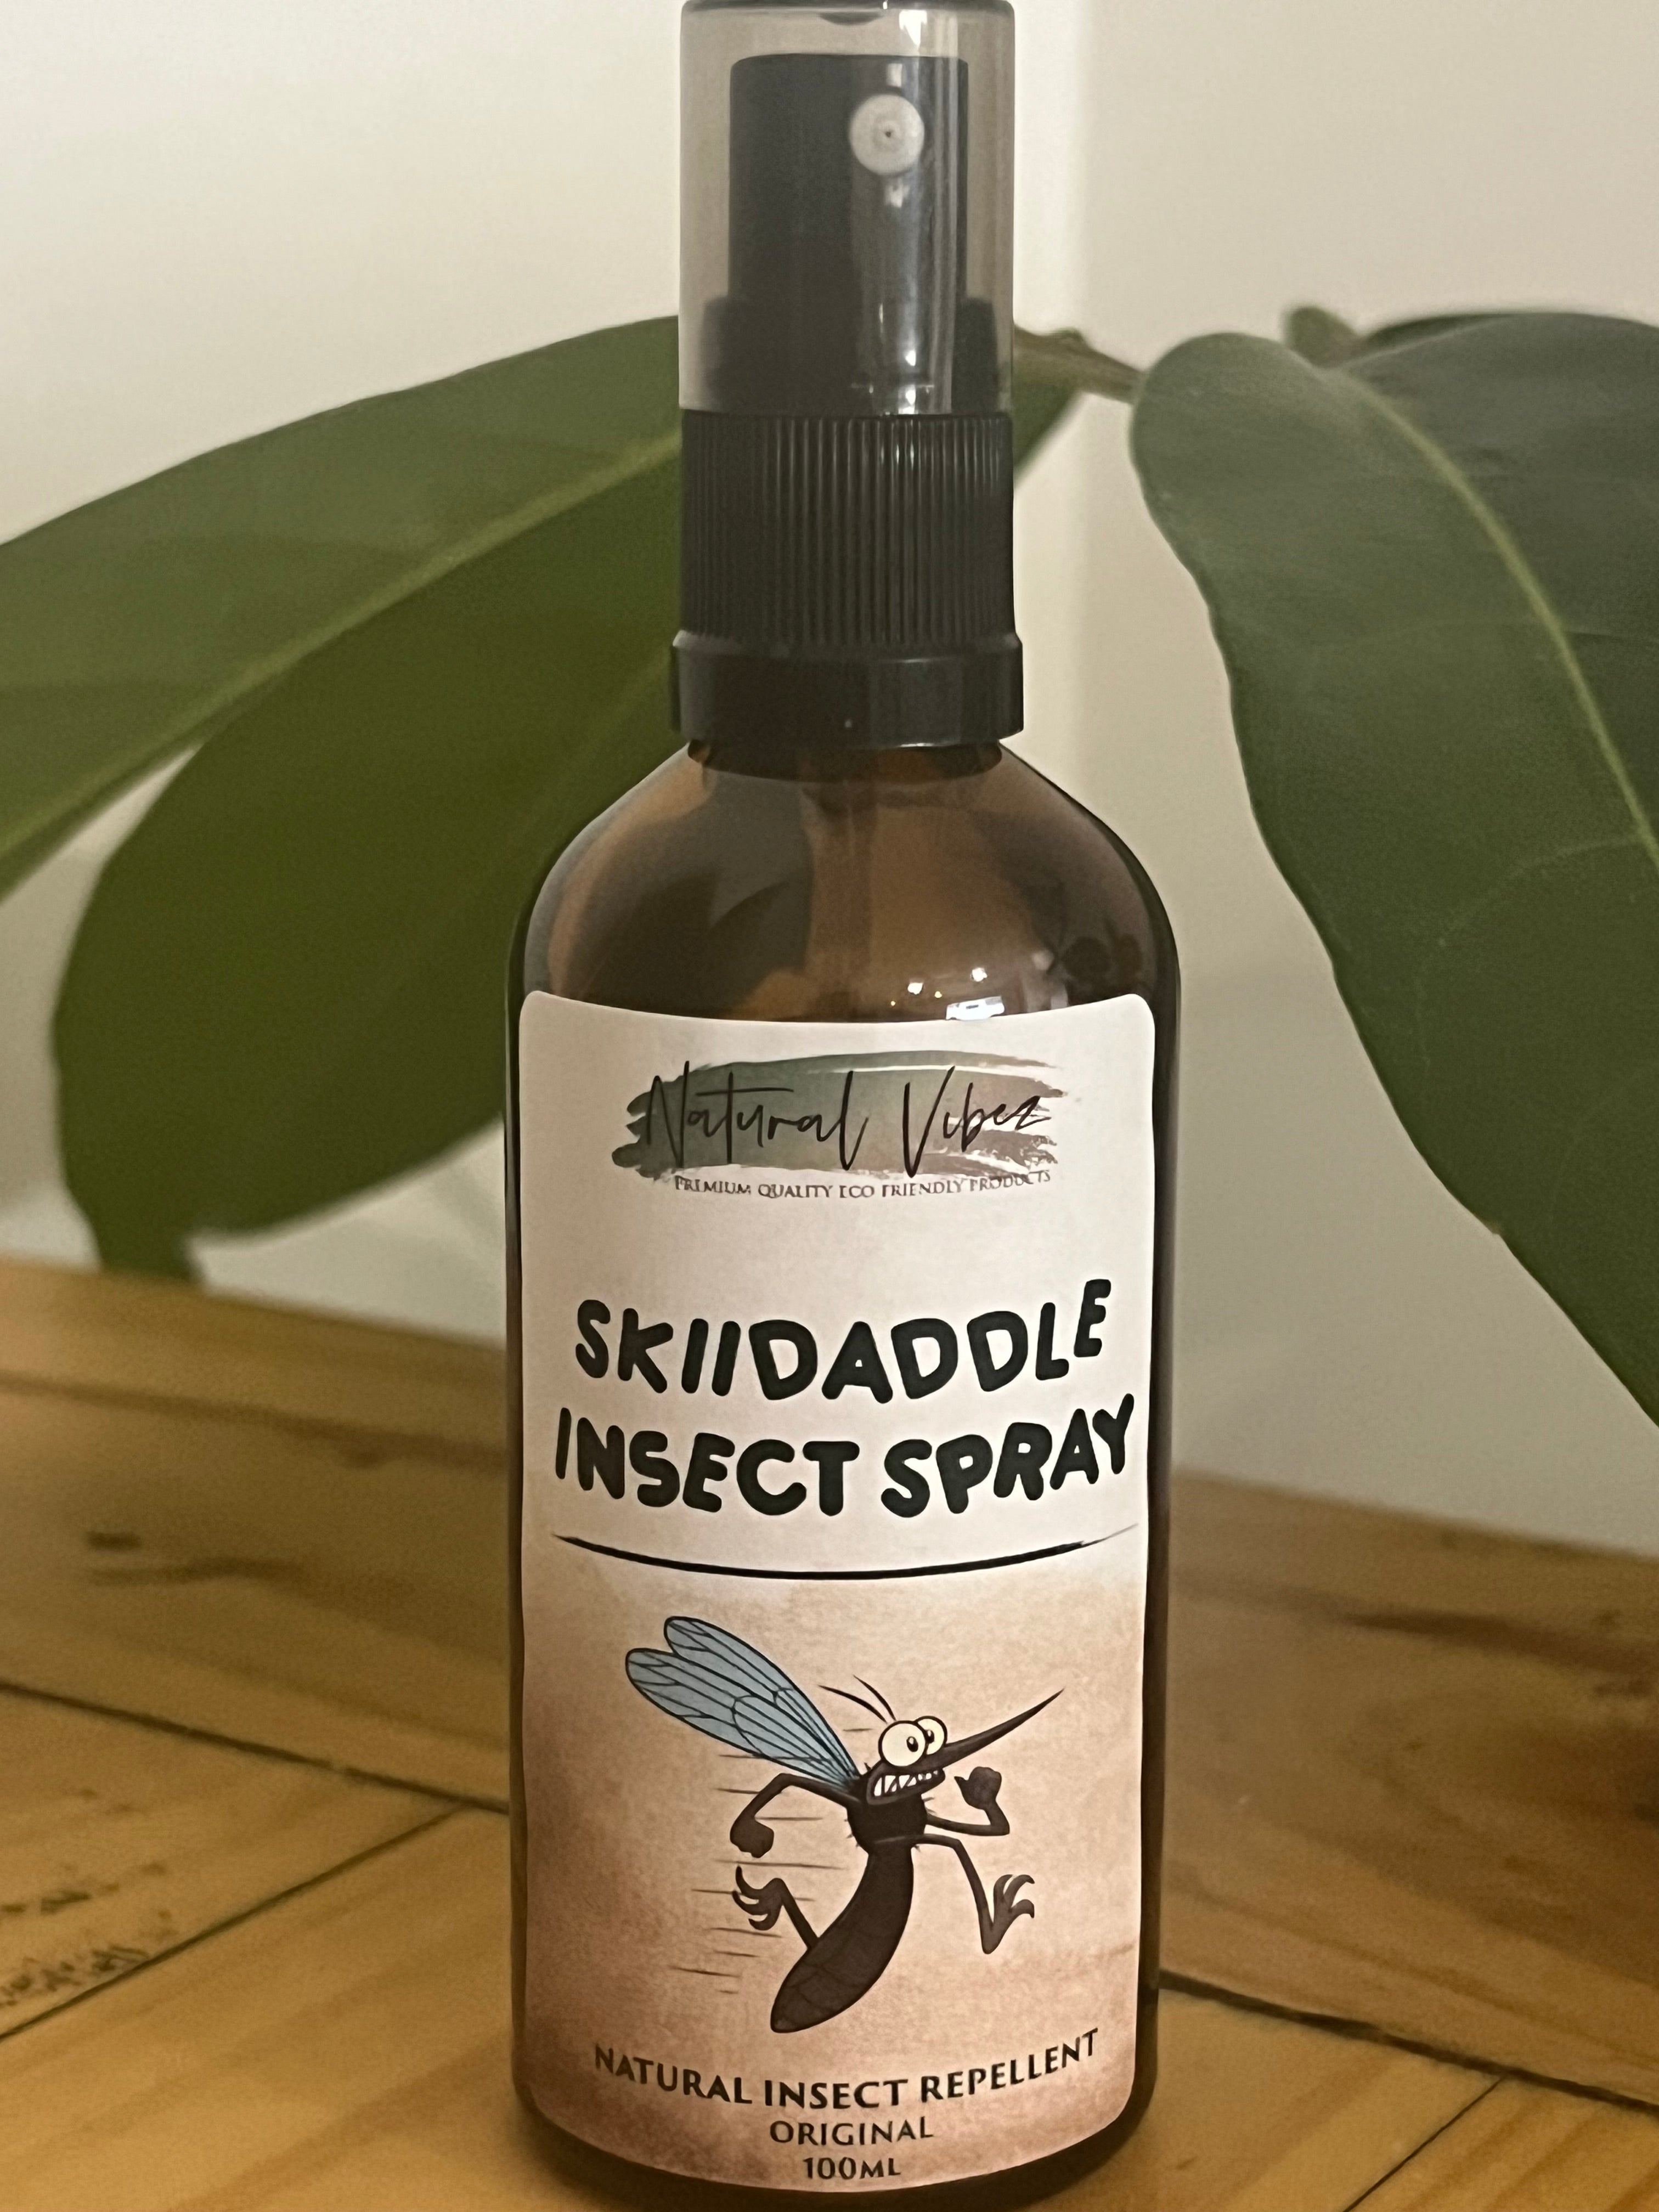 REDUCED TO CLEAR WAS $22 NOW $10 Skiidaddle Insect Spray